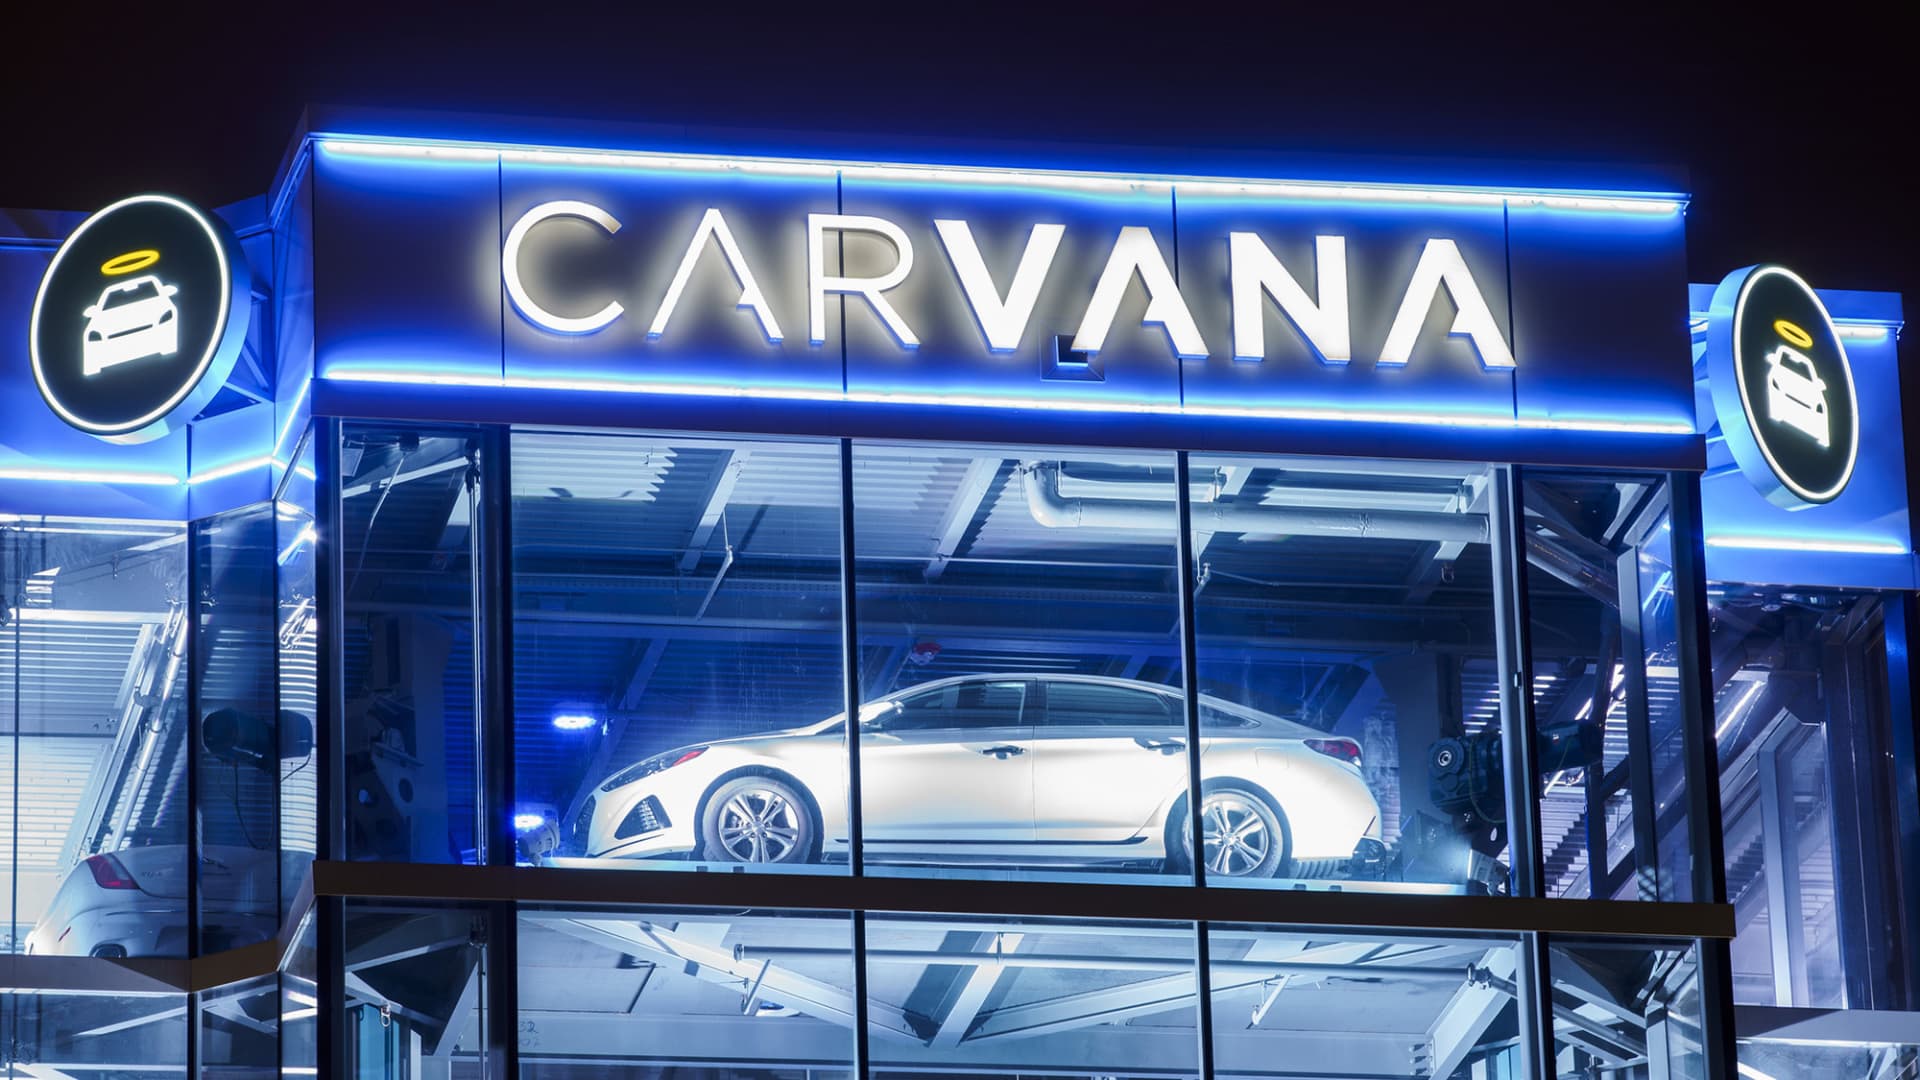 Carvana shares jump 40% on deal to reduce debt by $1.2 billion